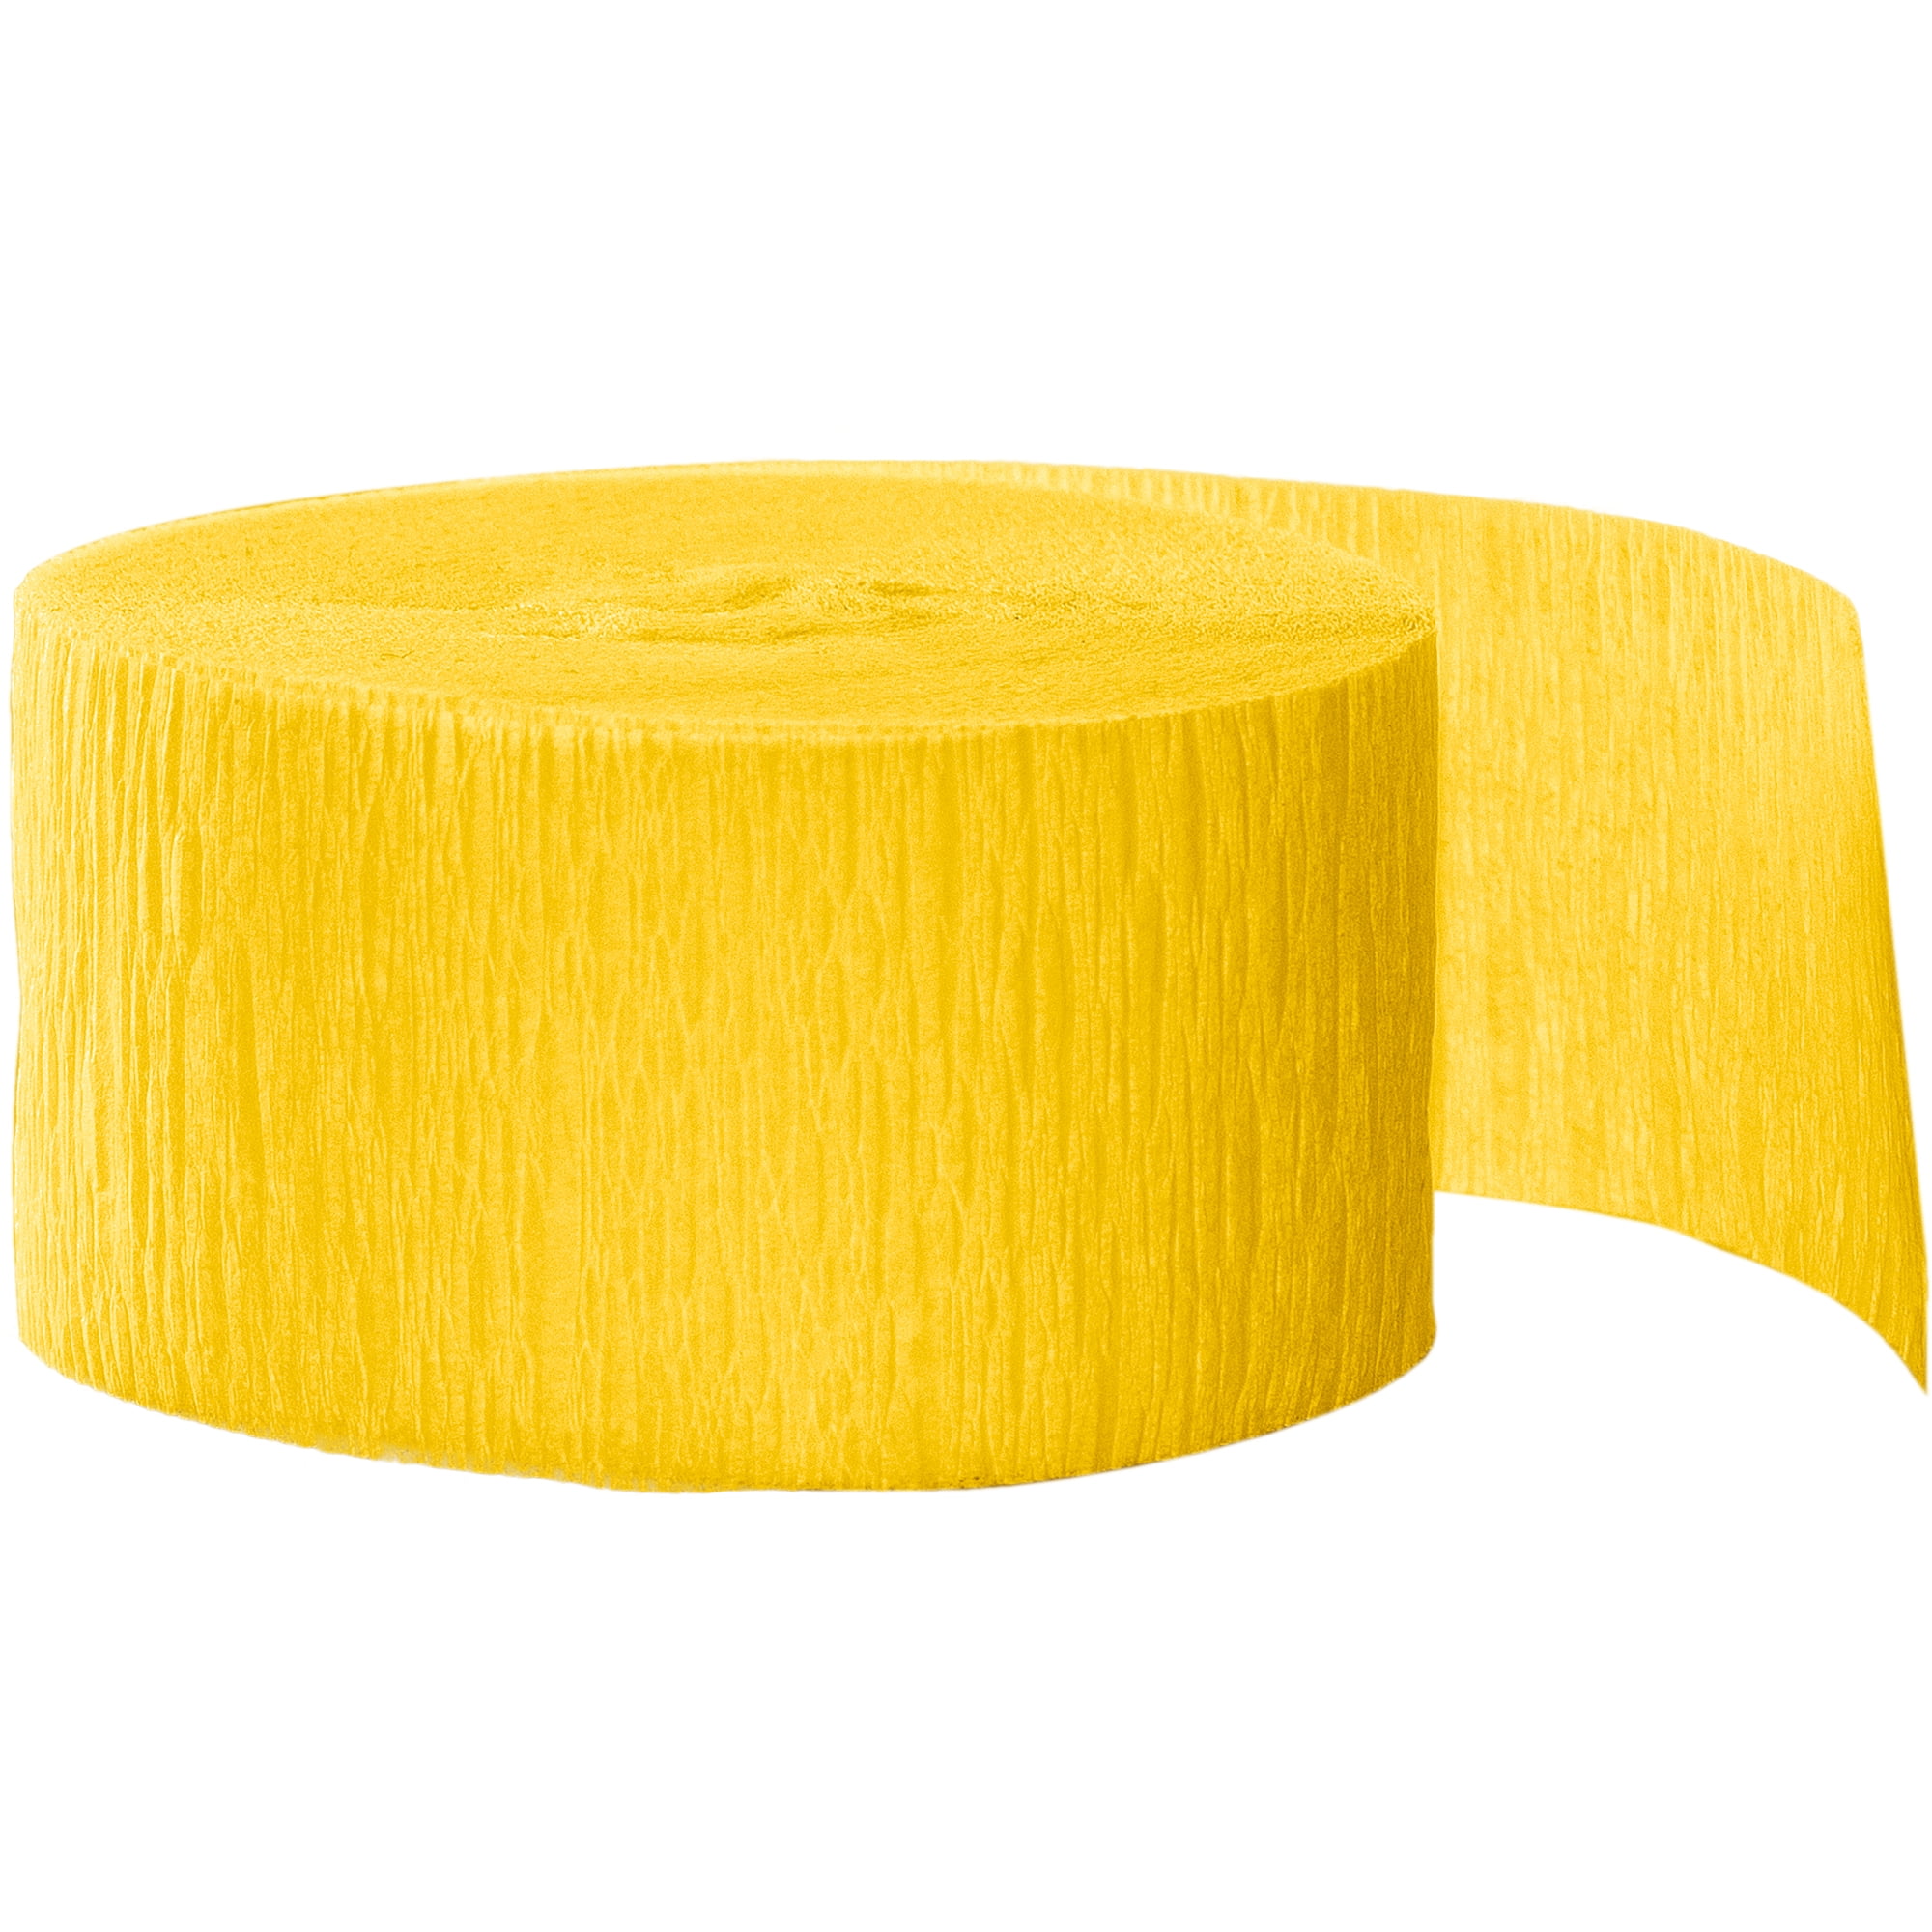 Crepe Paper Streamers 4 Rolls 72ft in 2 Colors (Light Yellow,Dark Green) -  Light Yellow, Dark Green - Bed Bath & Beyond - 37501353